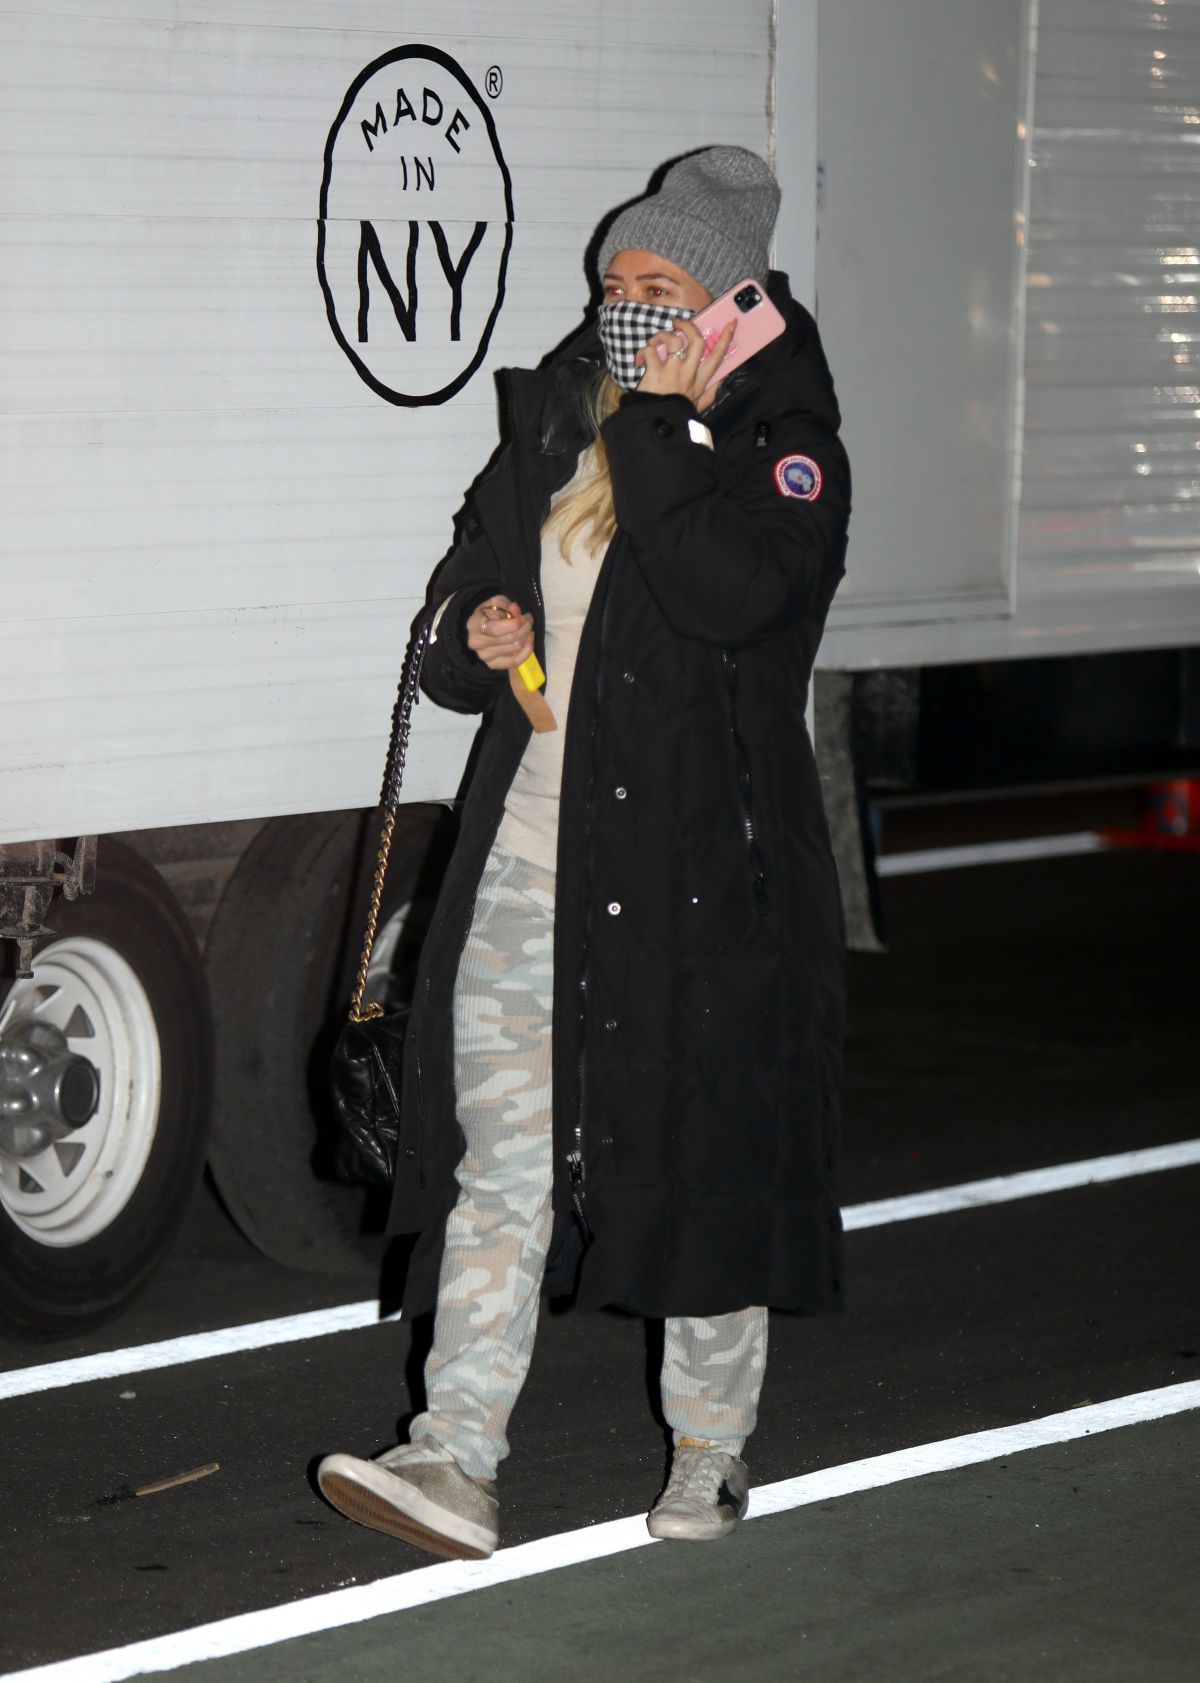 hilary-duff-arrives-on-the-set-of-younger-in-new-york-12-11-2020-0.jpg